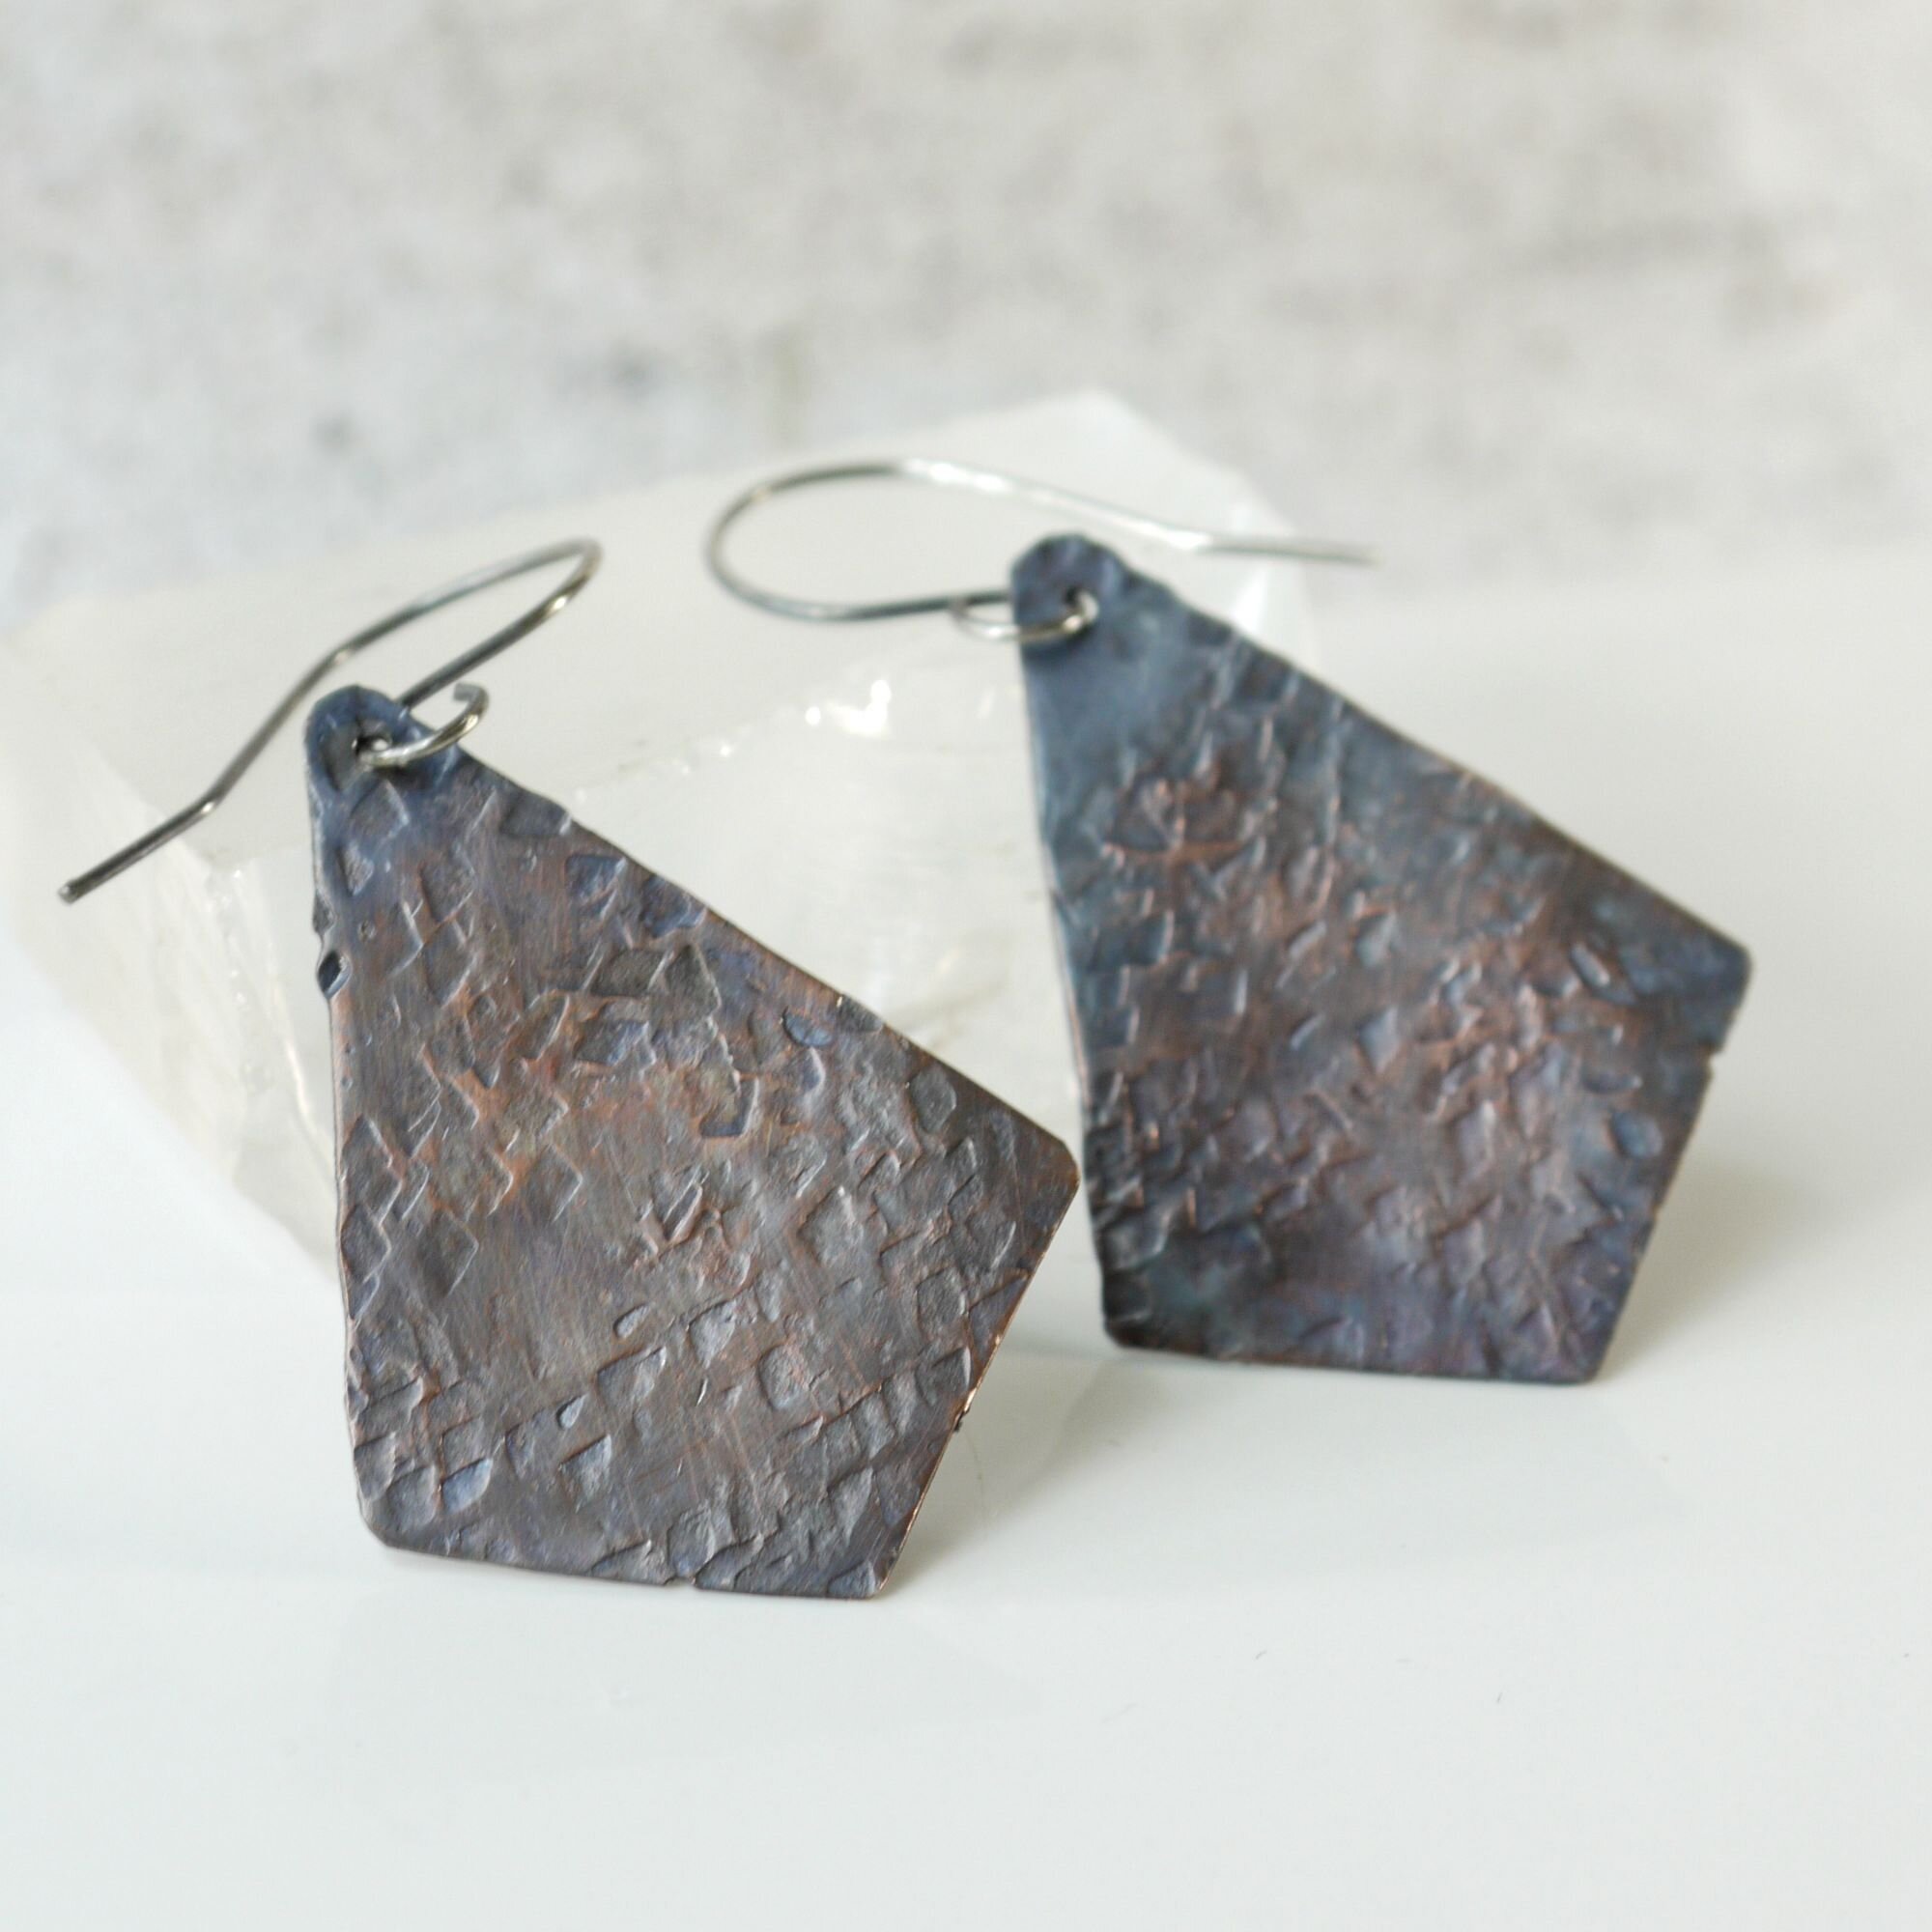 Oxidized Hammered Copper Kite Earrings